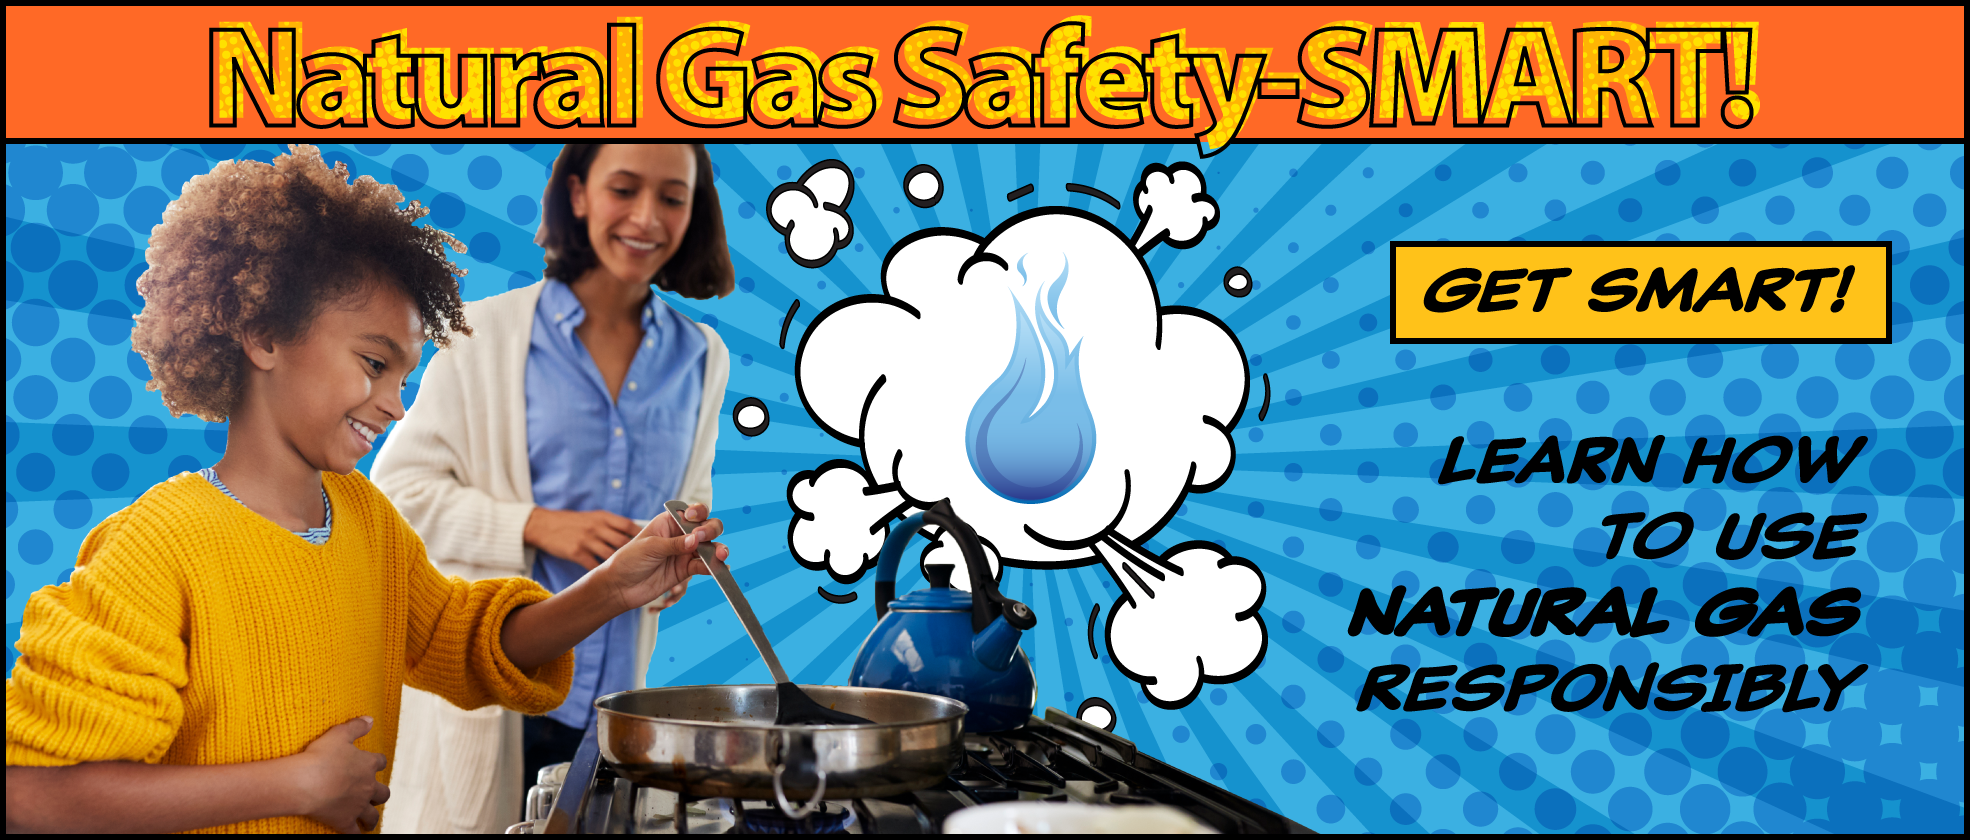 Natural Gas Safety-SMART: Get SMART! Learn how to use natural gas responsibly